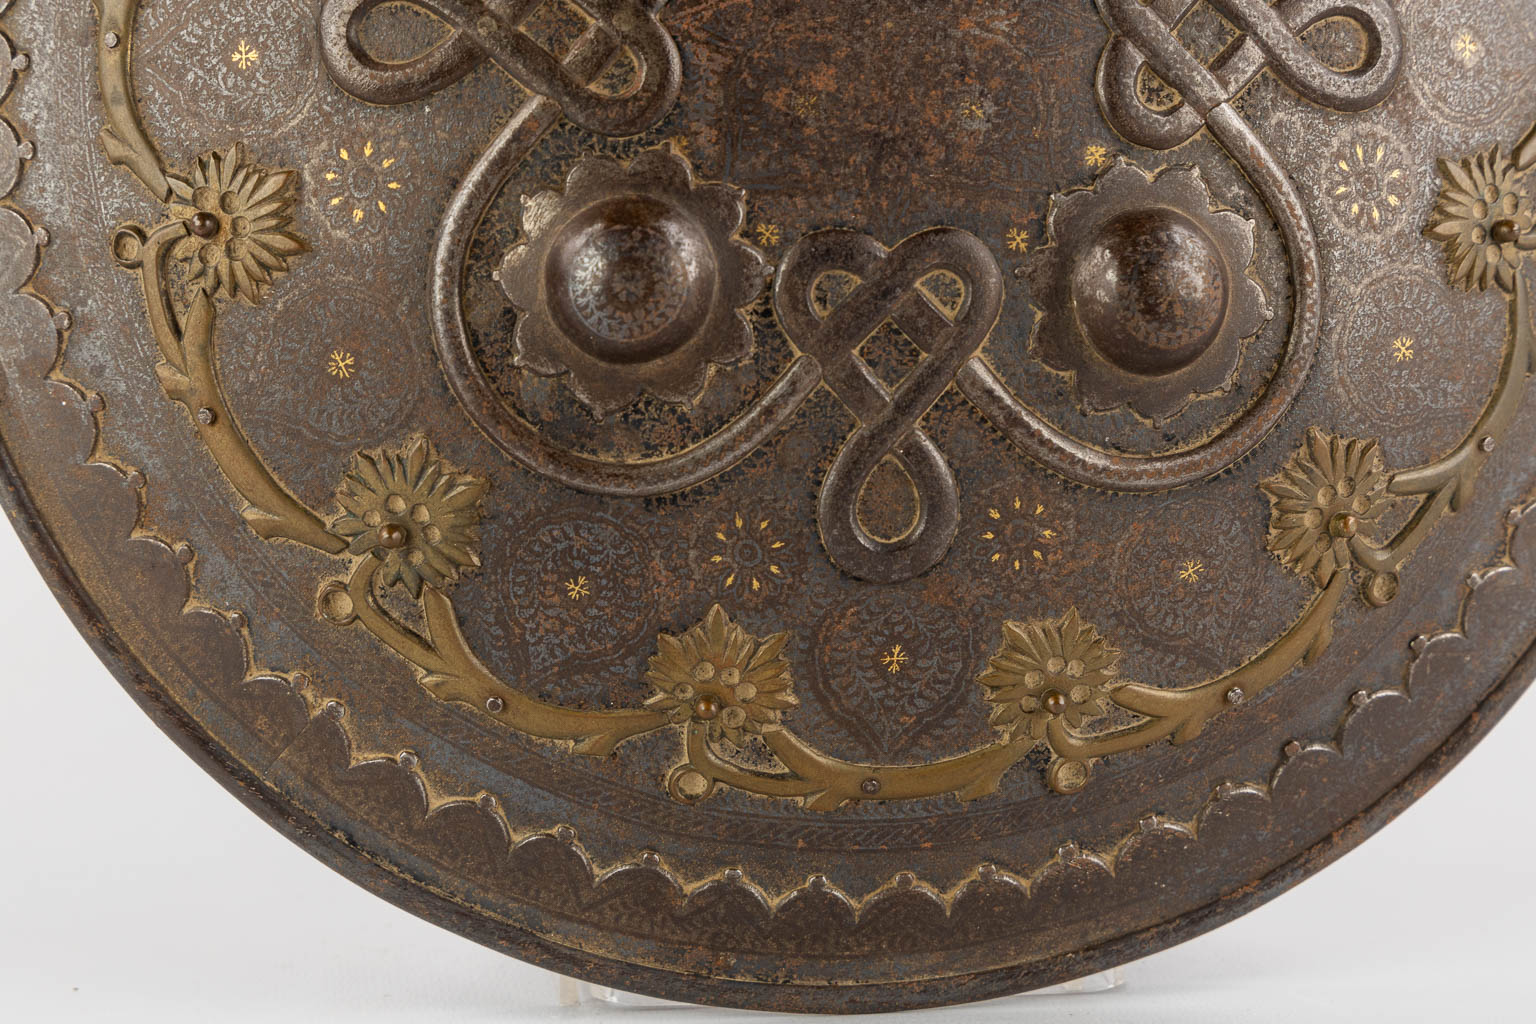 An antique Shield, Indo-Persian, Dhal, India. 19th C. (H:5 x D:31 cm) - Image 6 of 8